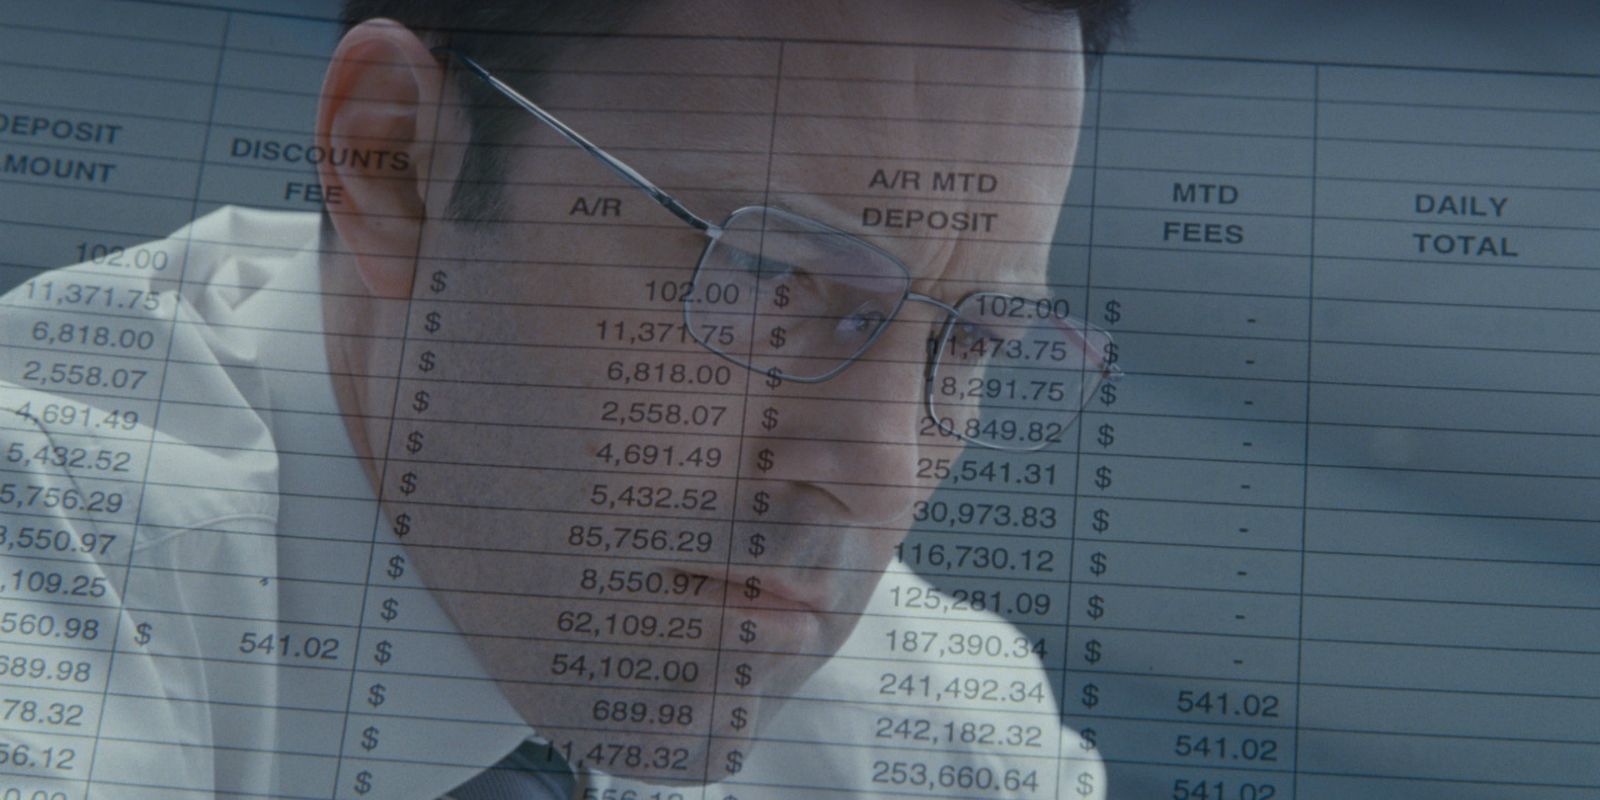 The Accountant Interview With Director Gavin OConnor